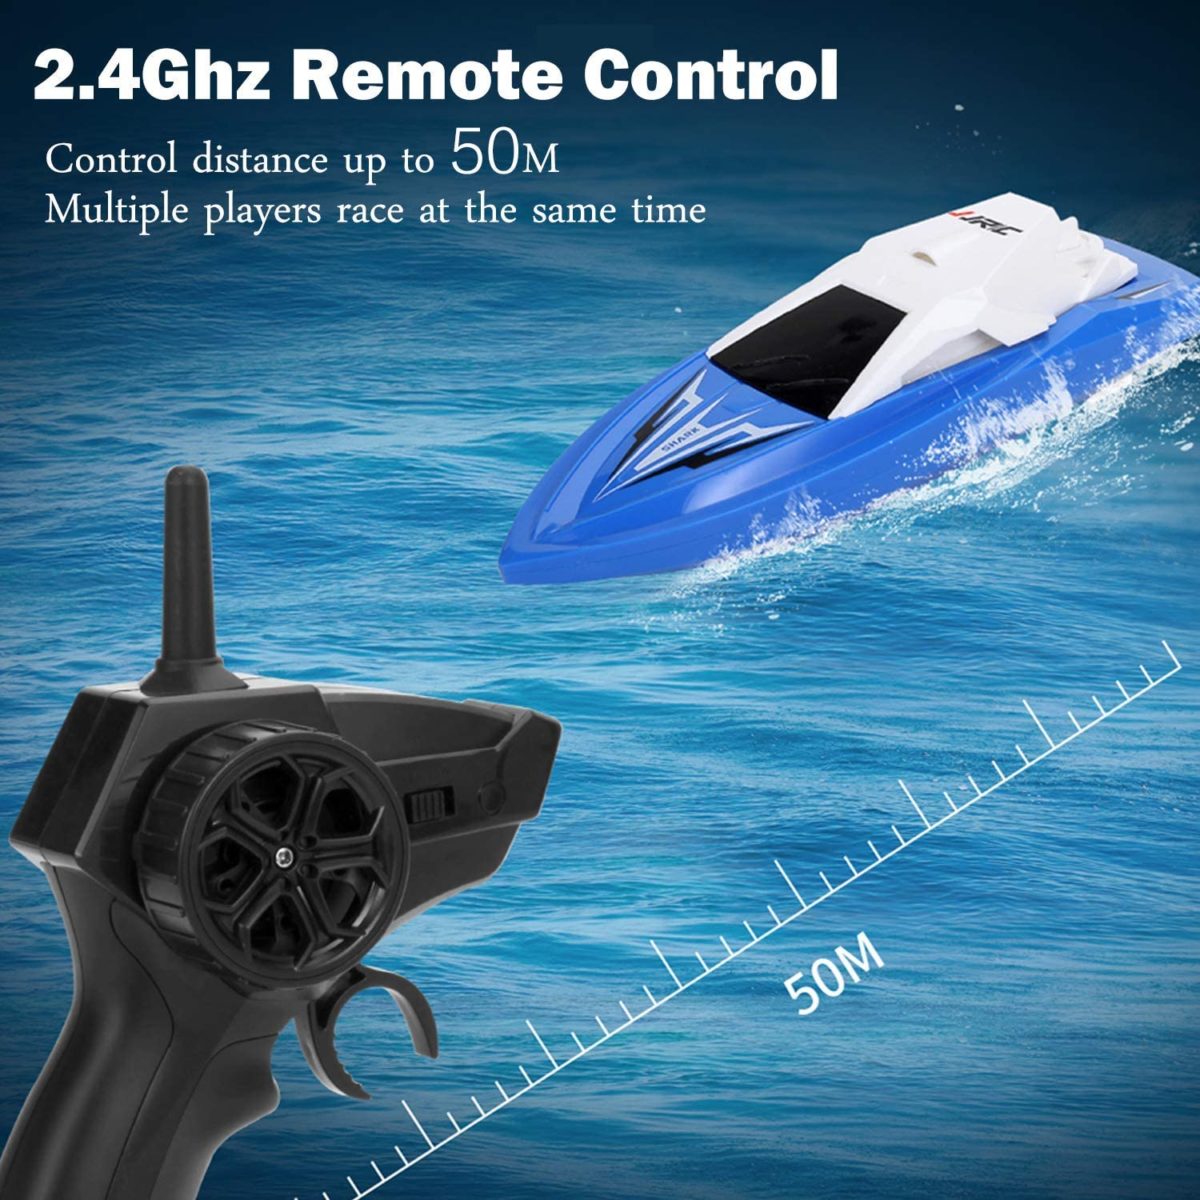 Remote Control Boat - Top Toys and Gifts for Eight Year Old Boys 2